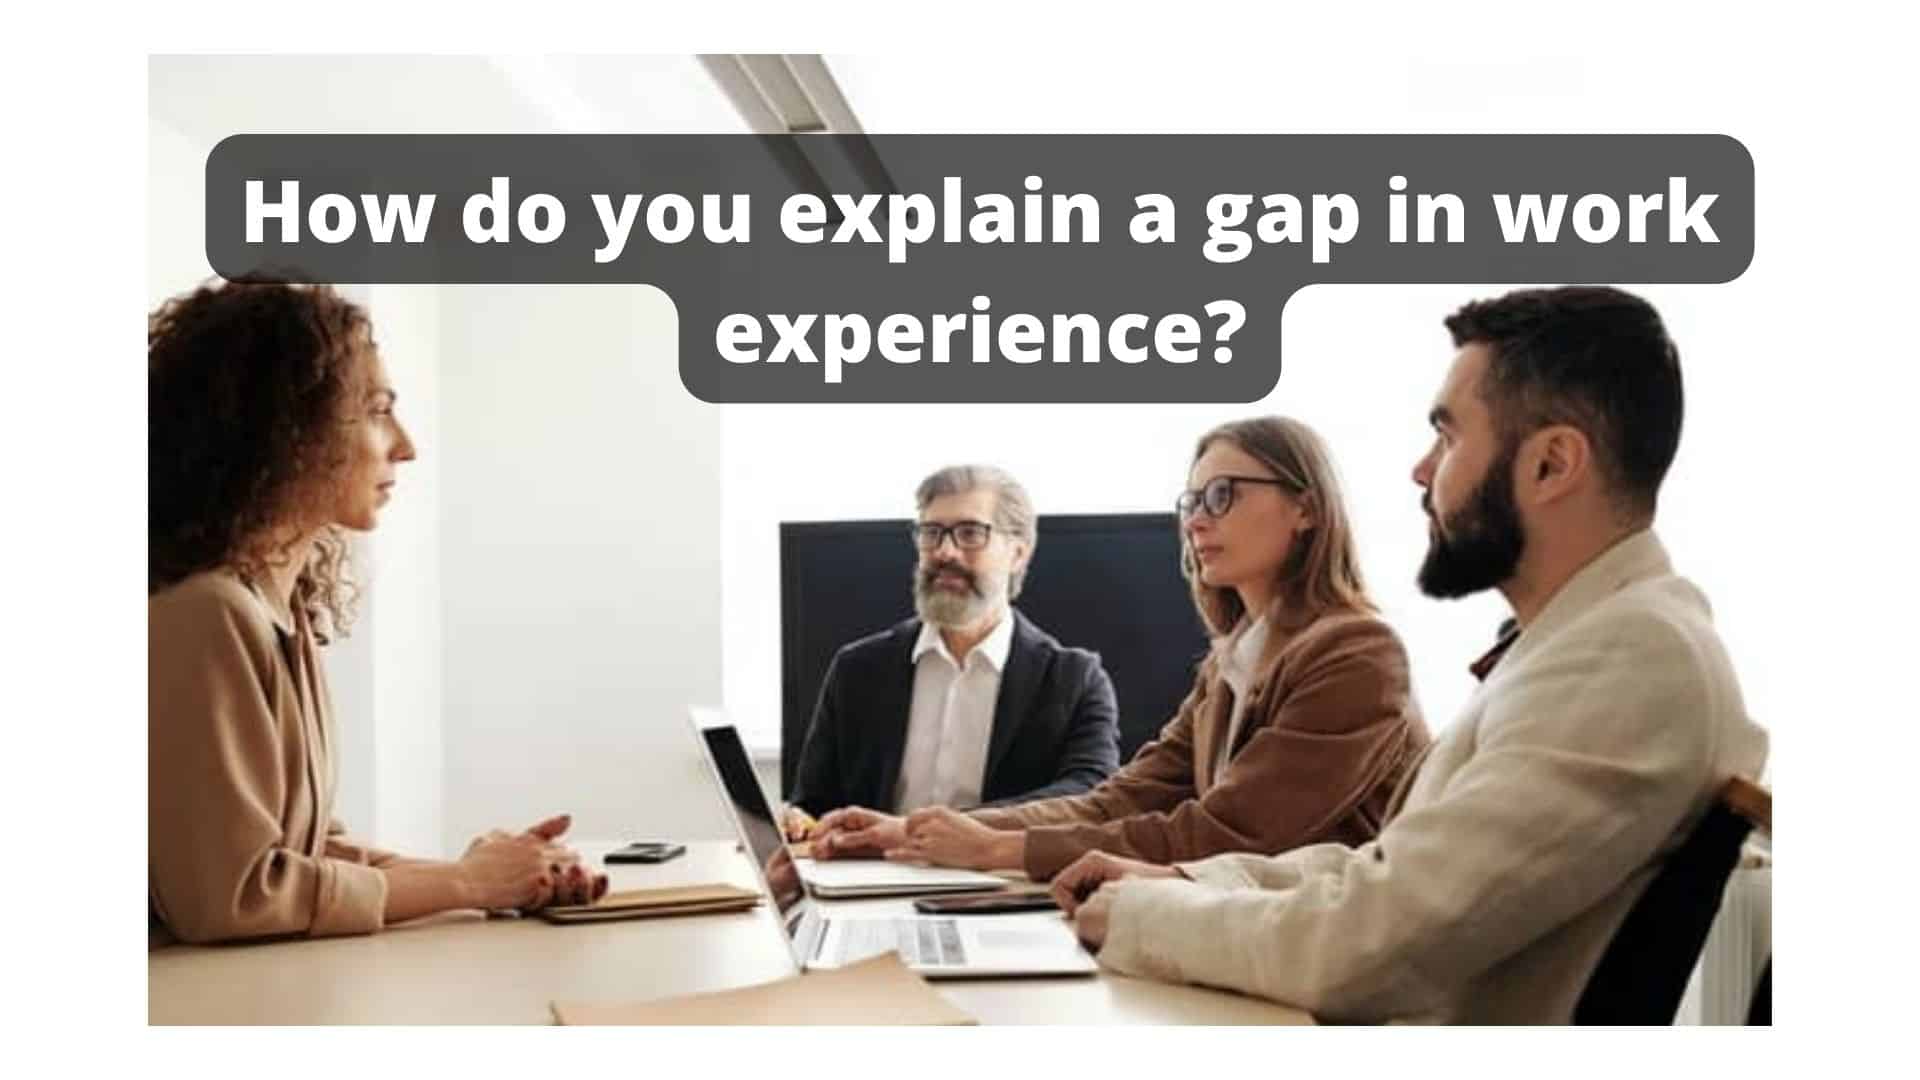 How do you explain a gap in work experience?